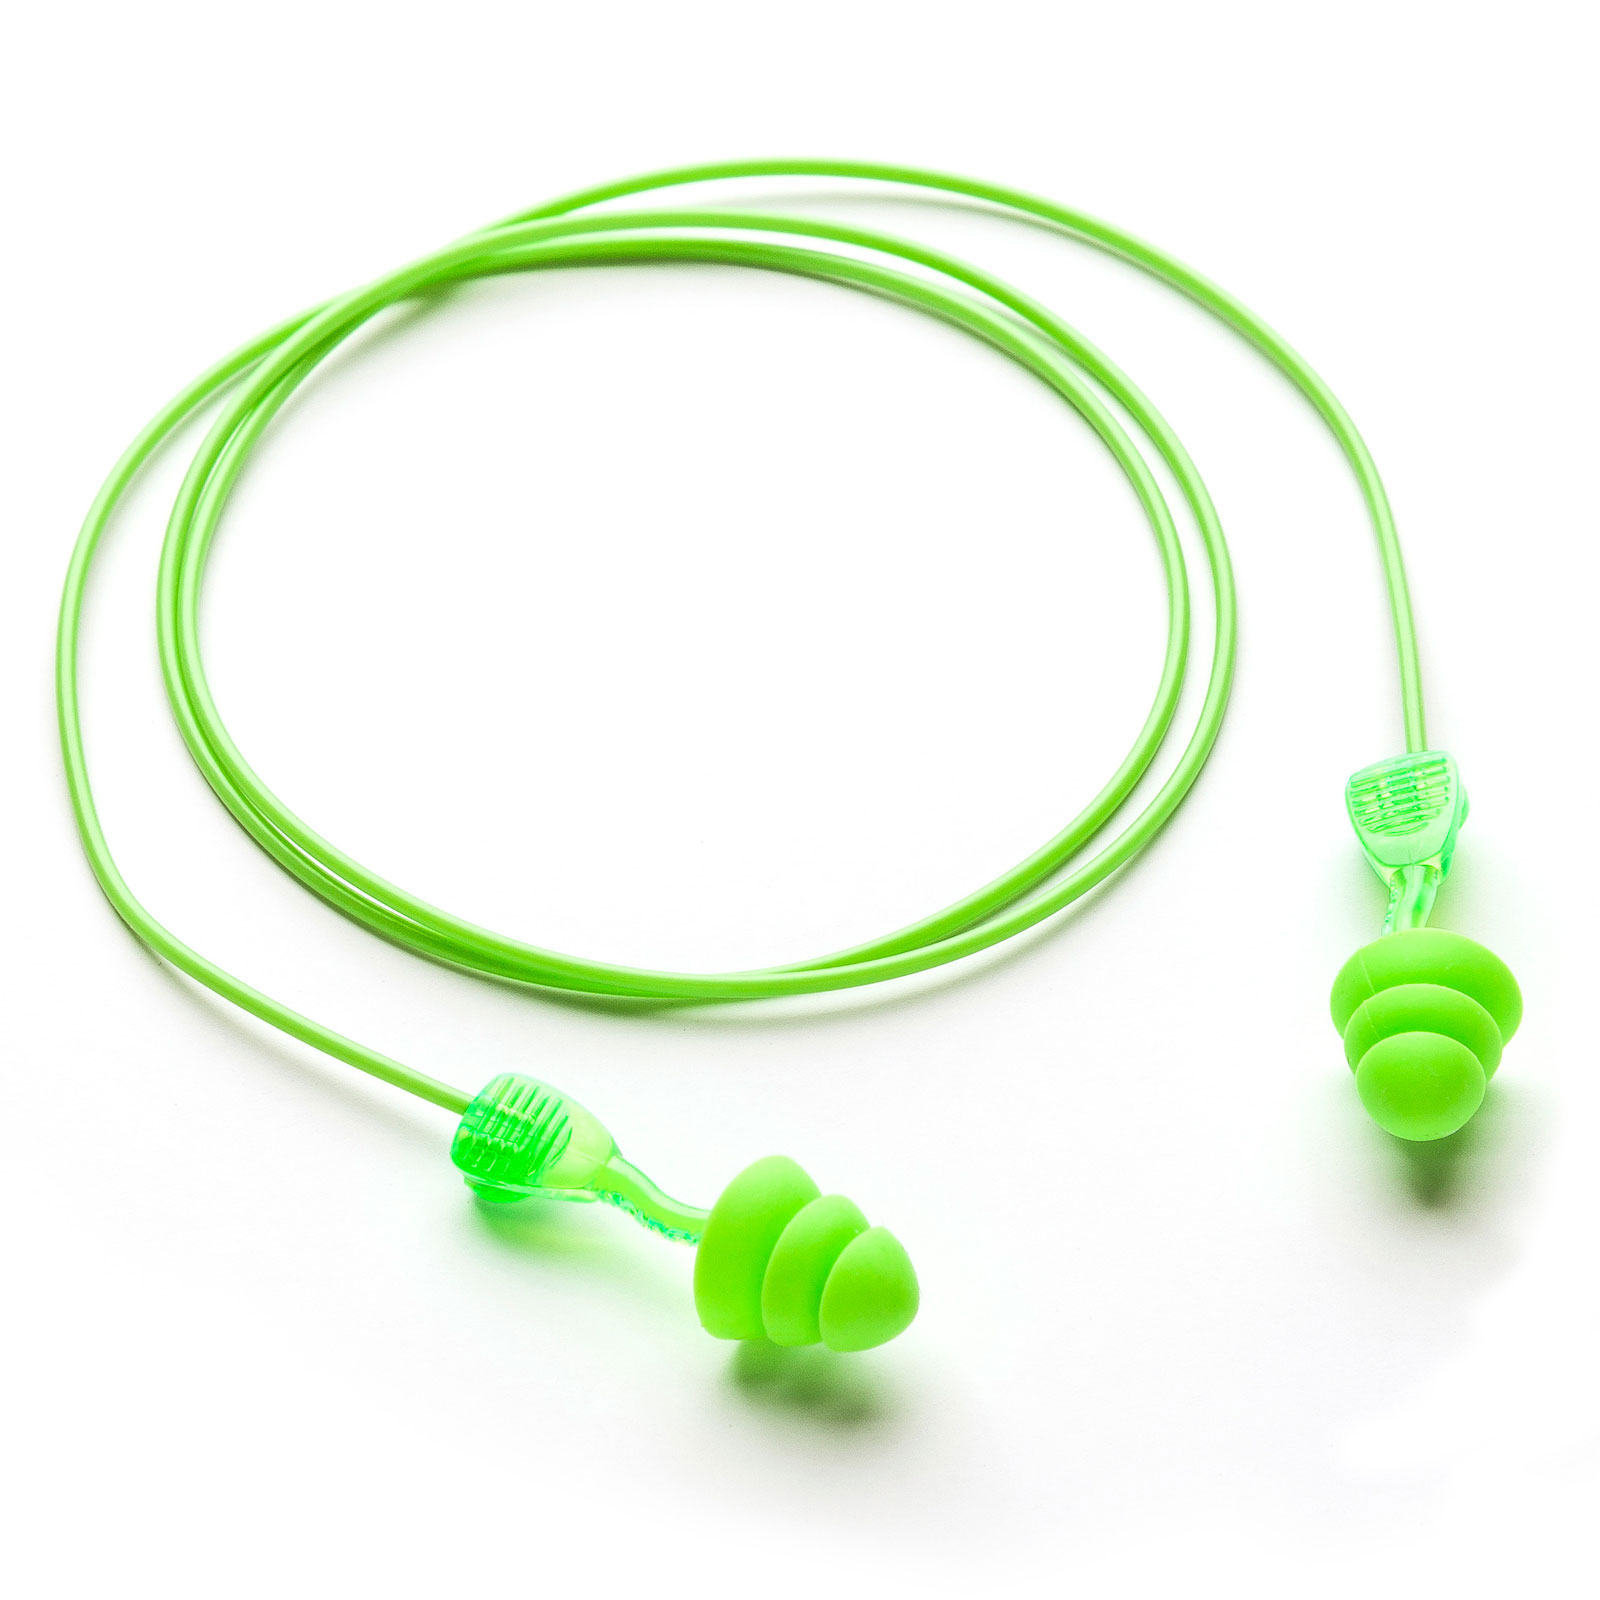 6451 TWISTERS TRIO EAR PLUGS WITH CORD - MOLDEX